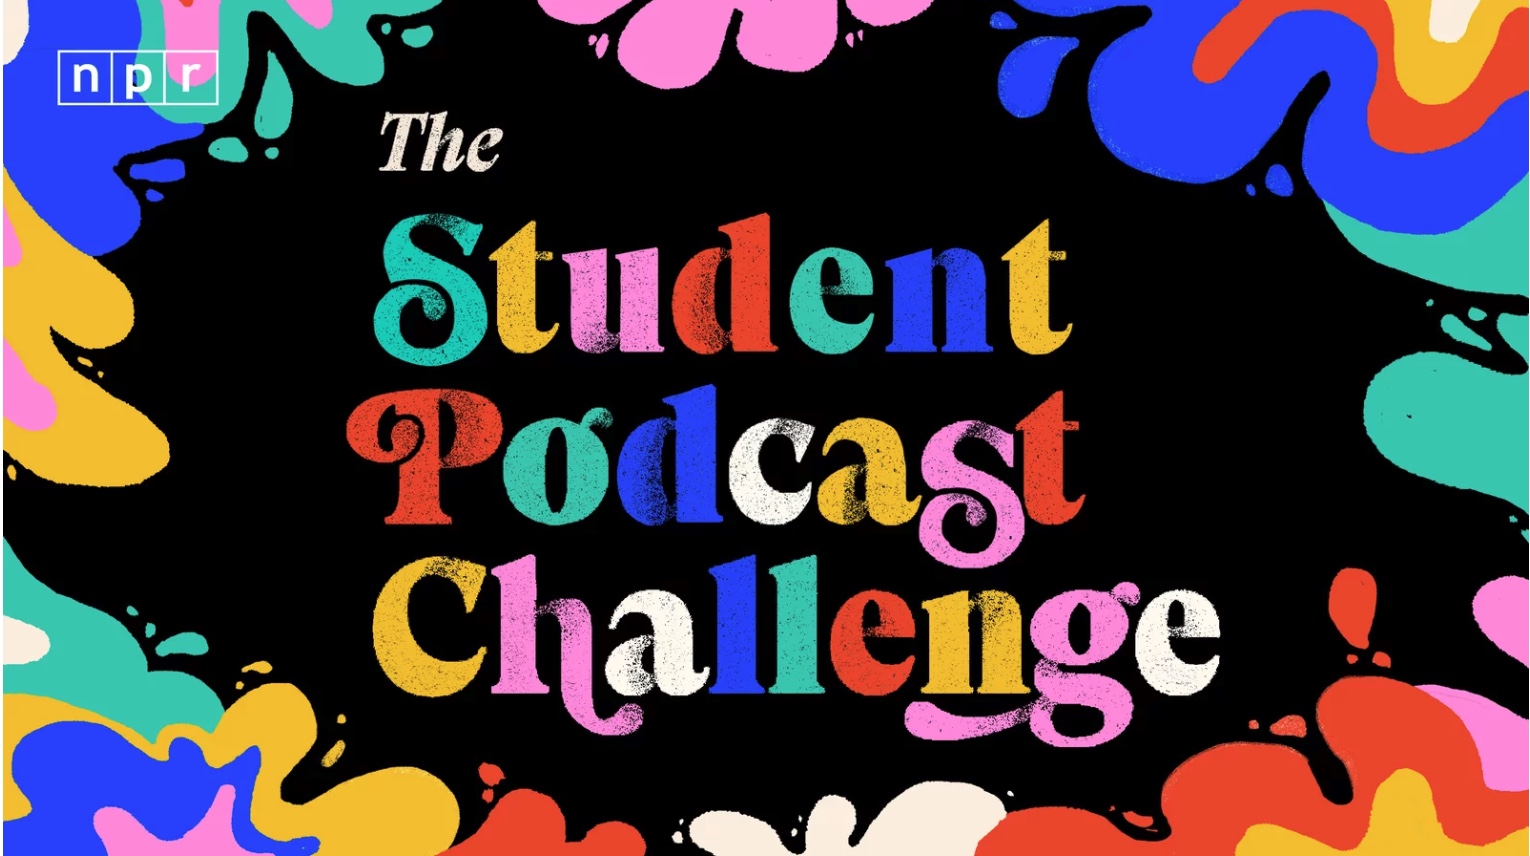 colorful image for NPR student podcast challenge